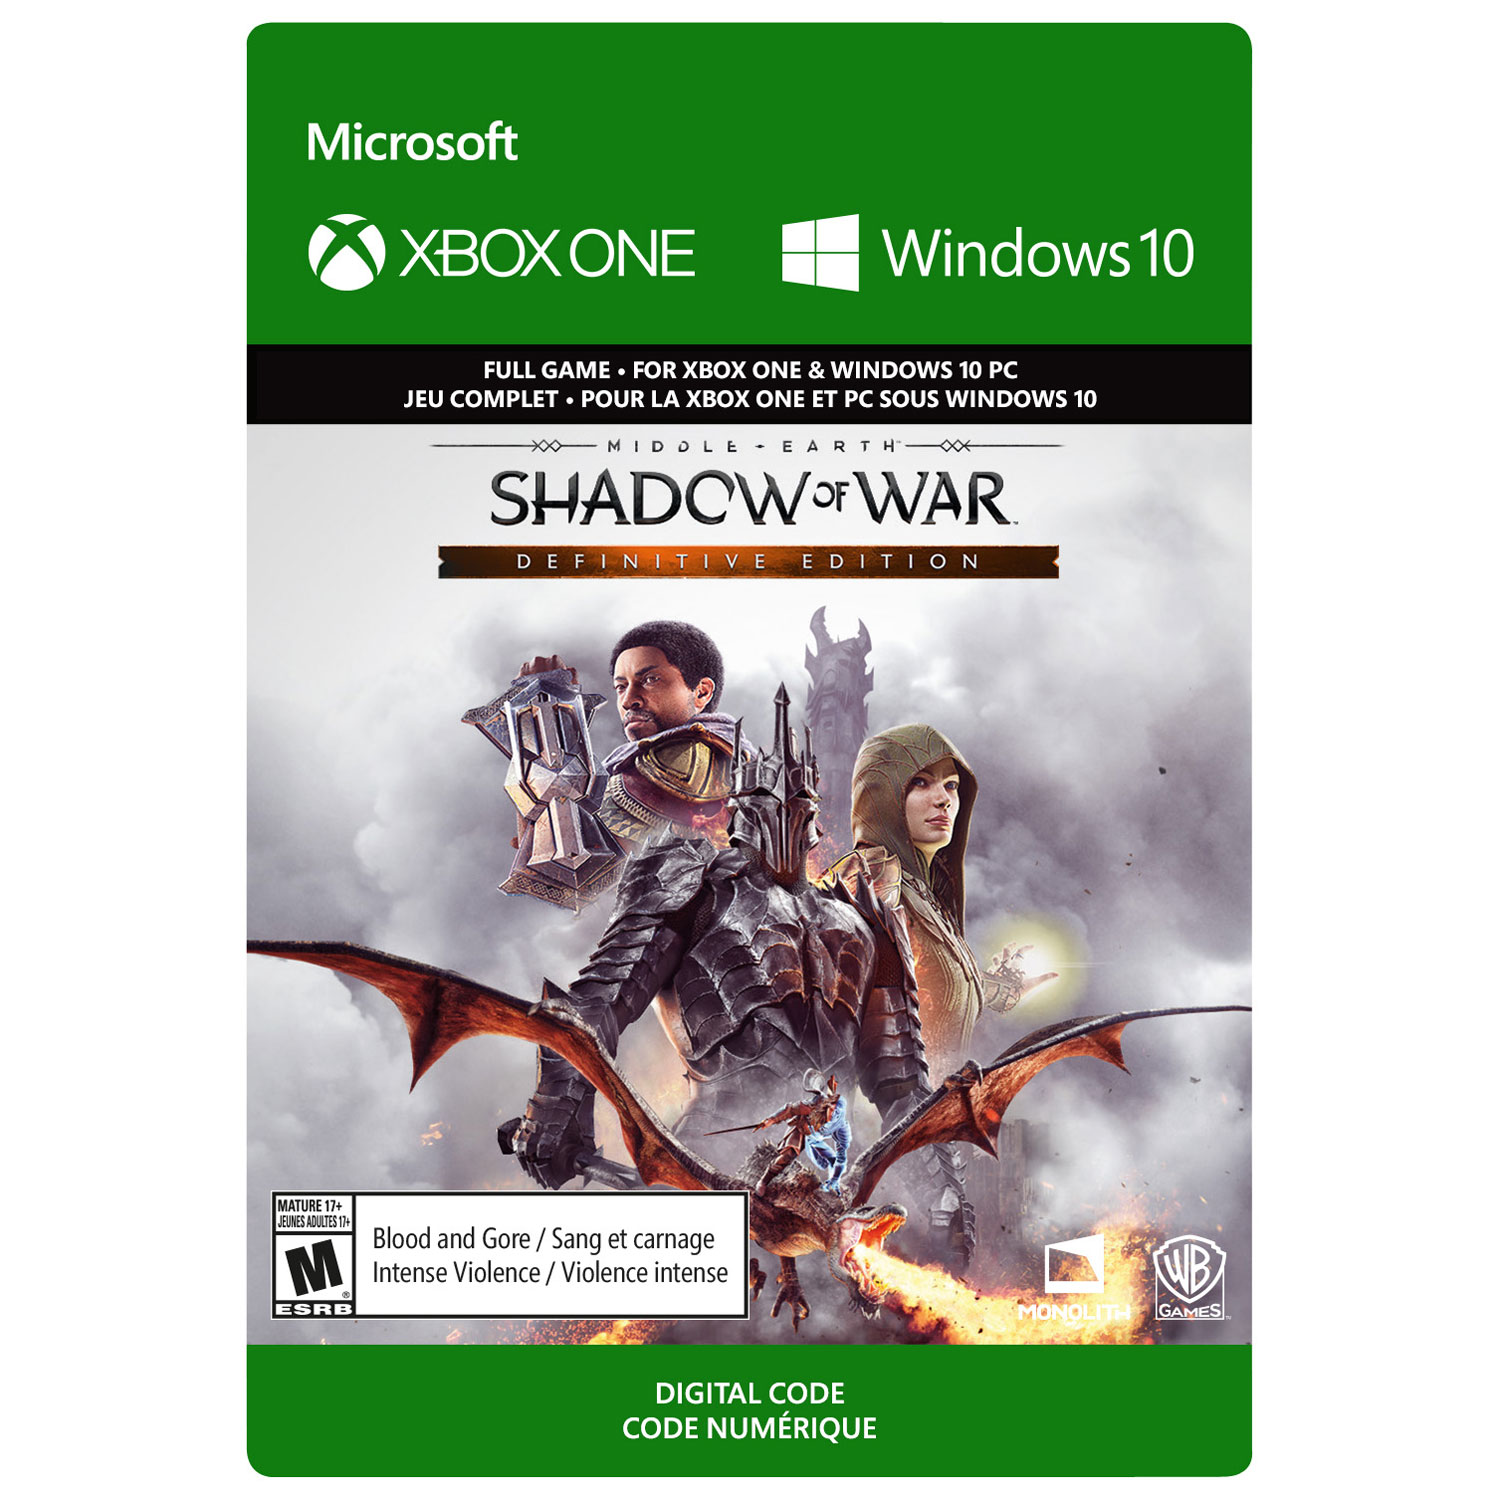 Middle-Earth: Shadow of War Definitive Edition (Xbox One) - Digital Download